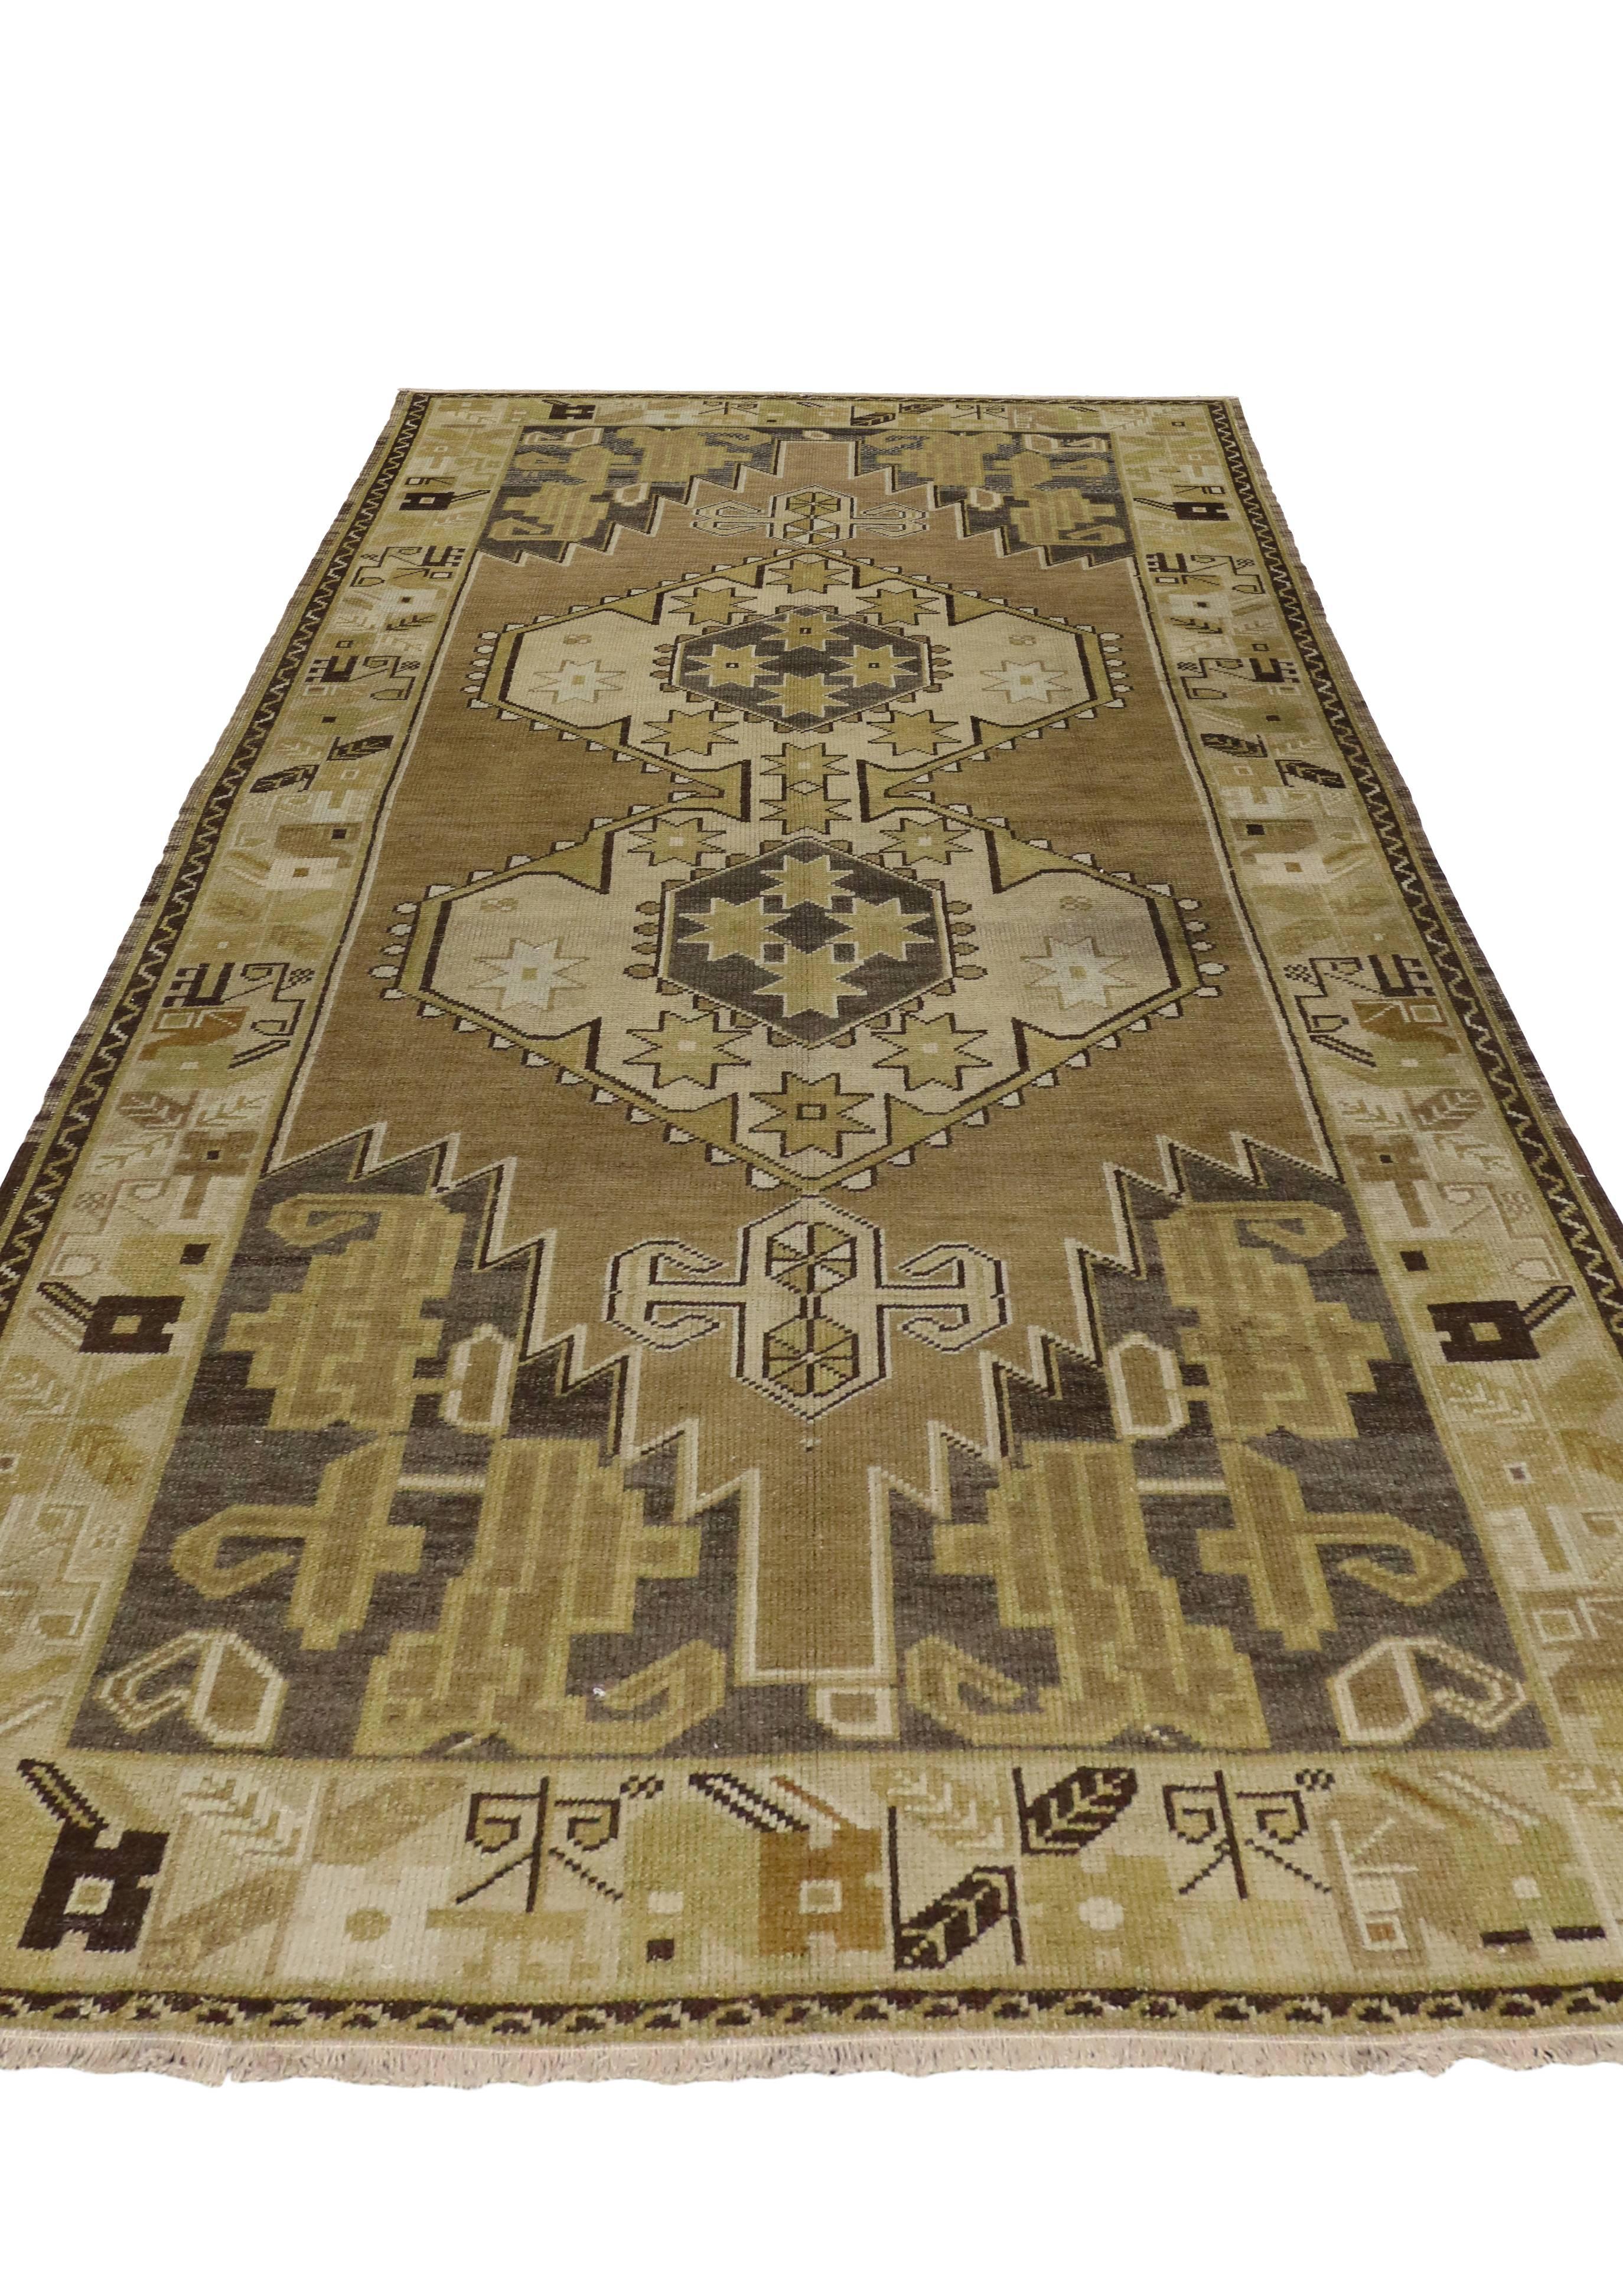 Hand-Knotted Vintage Turkish Oushak Carpet Runner with Mid-Century Modern Style